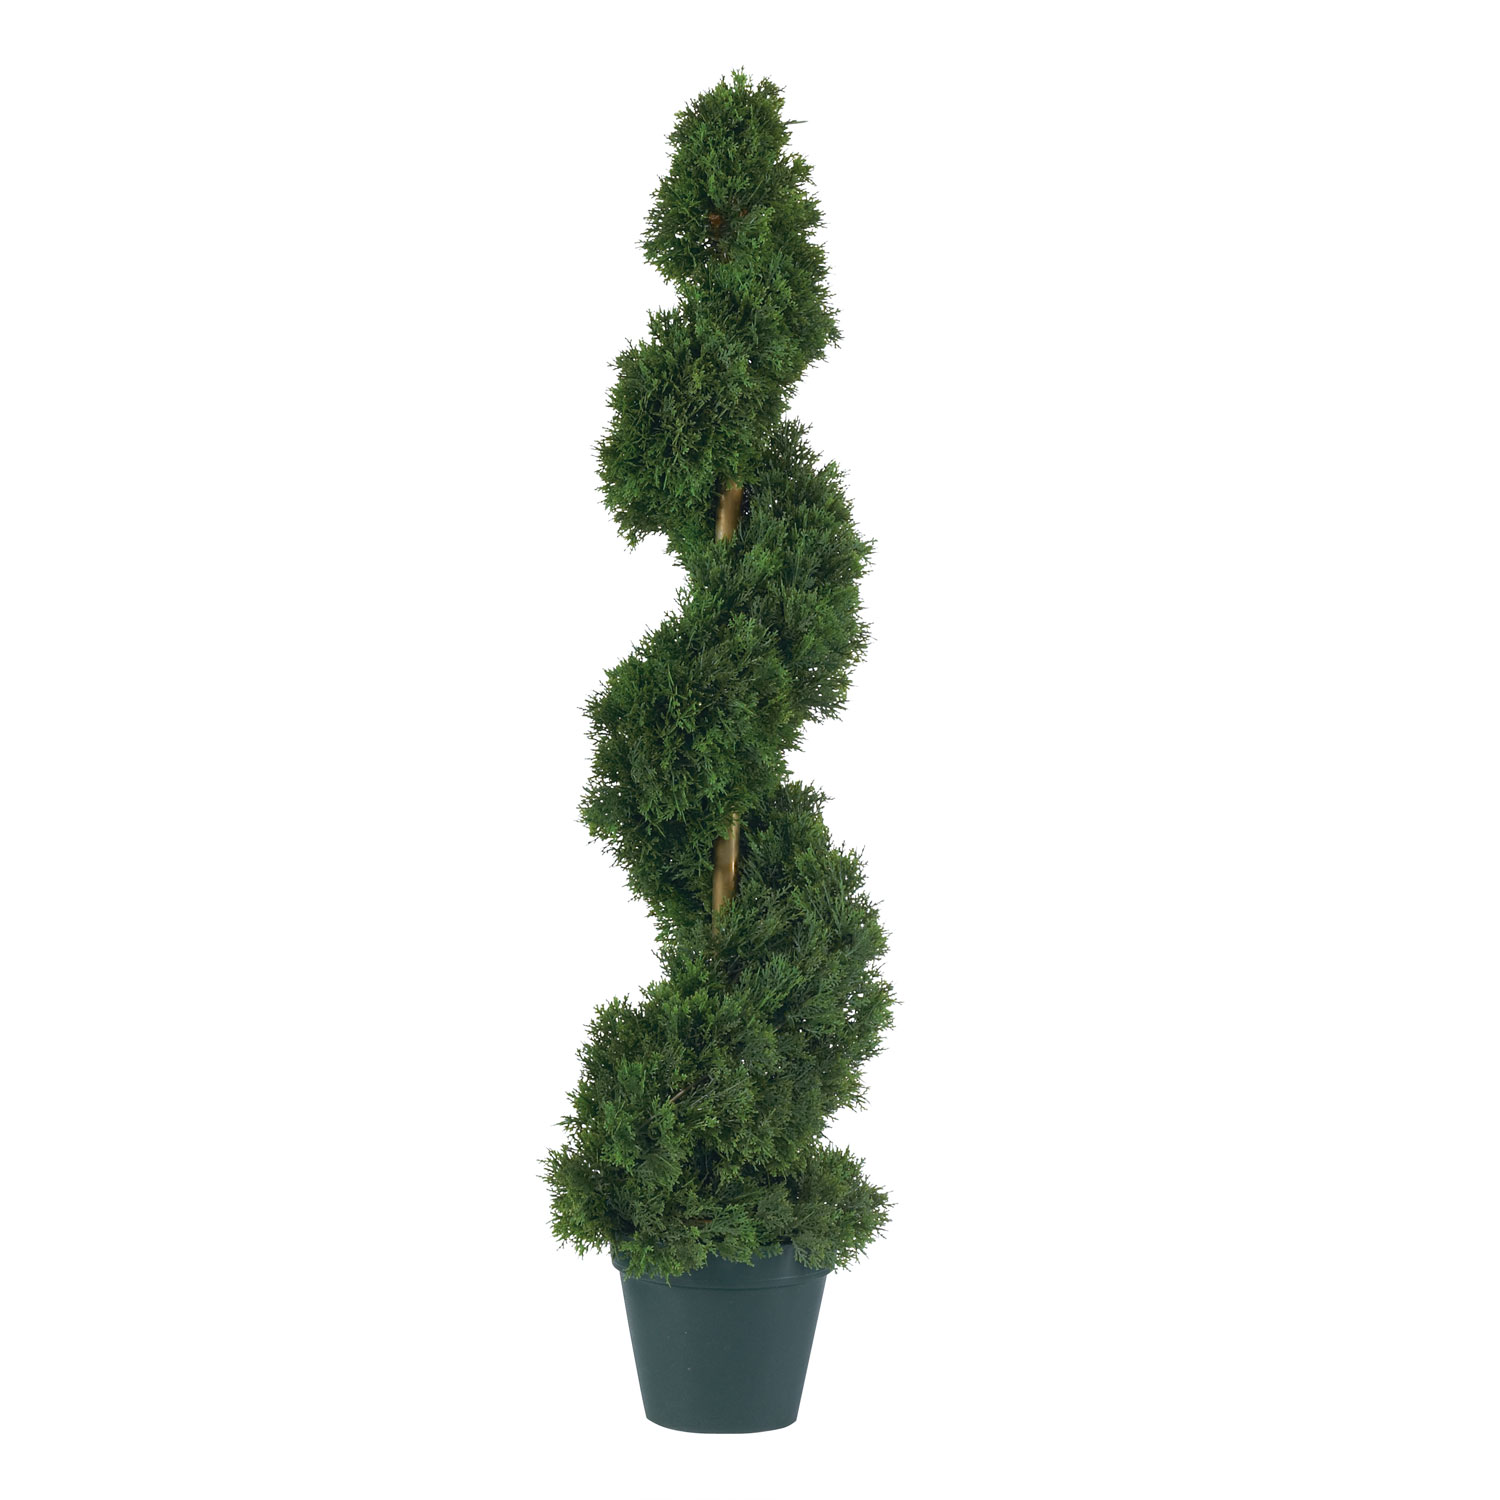 3 Foot Artificial Cedar Spiral Topiary Tree: Potted